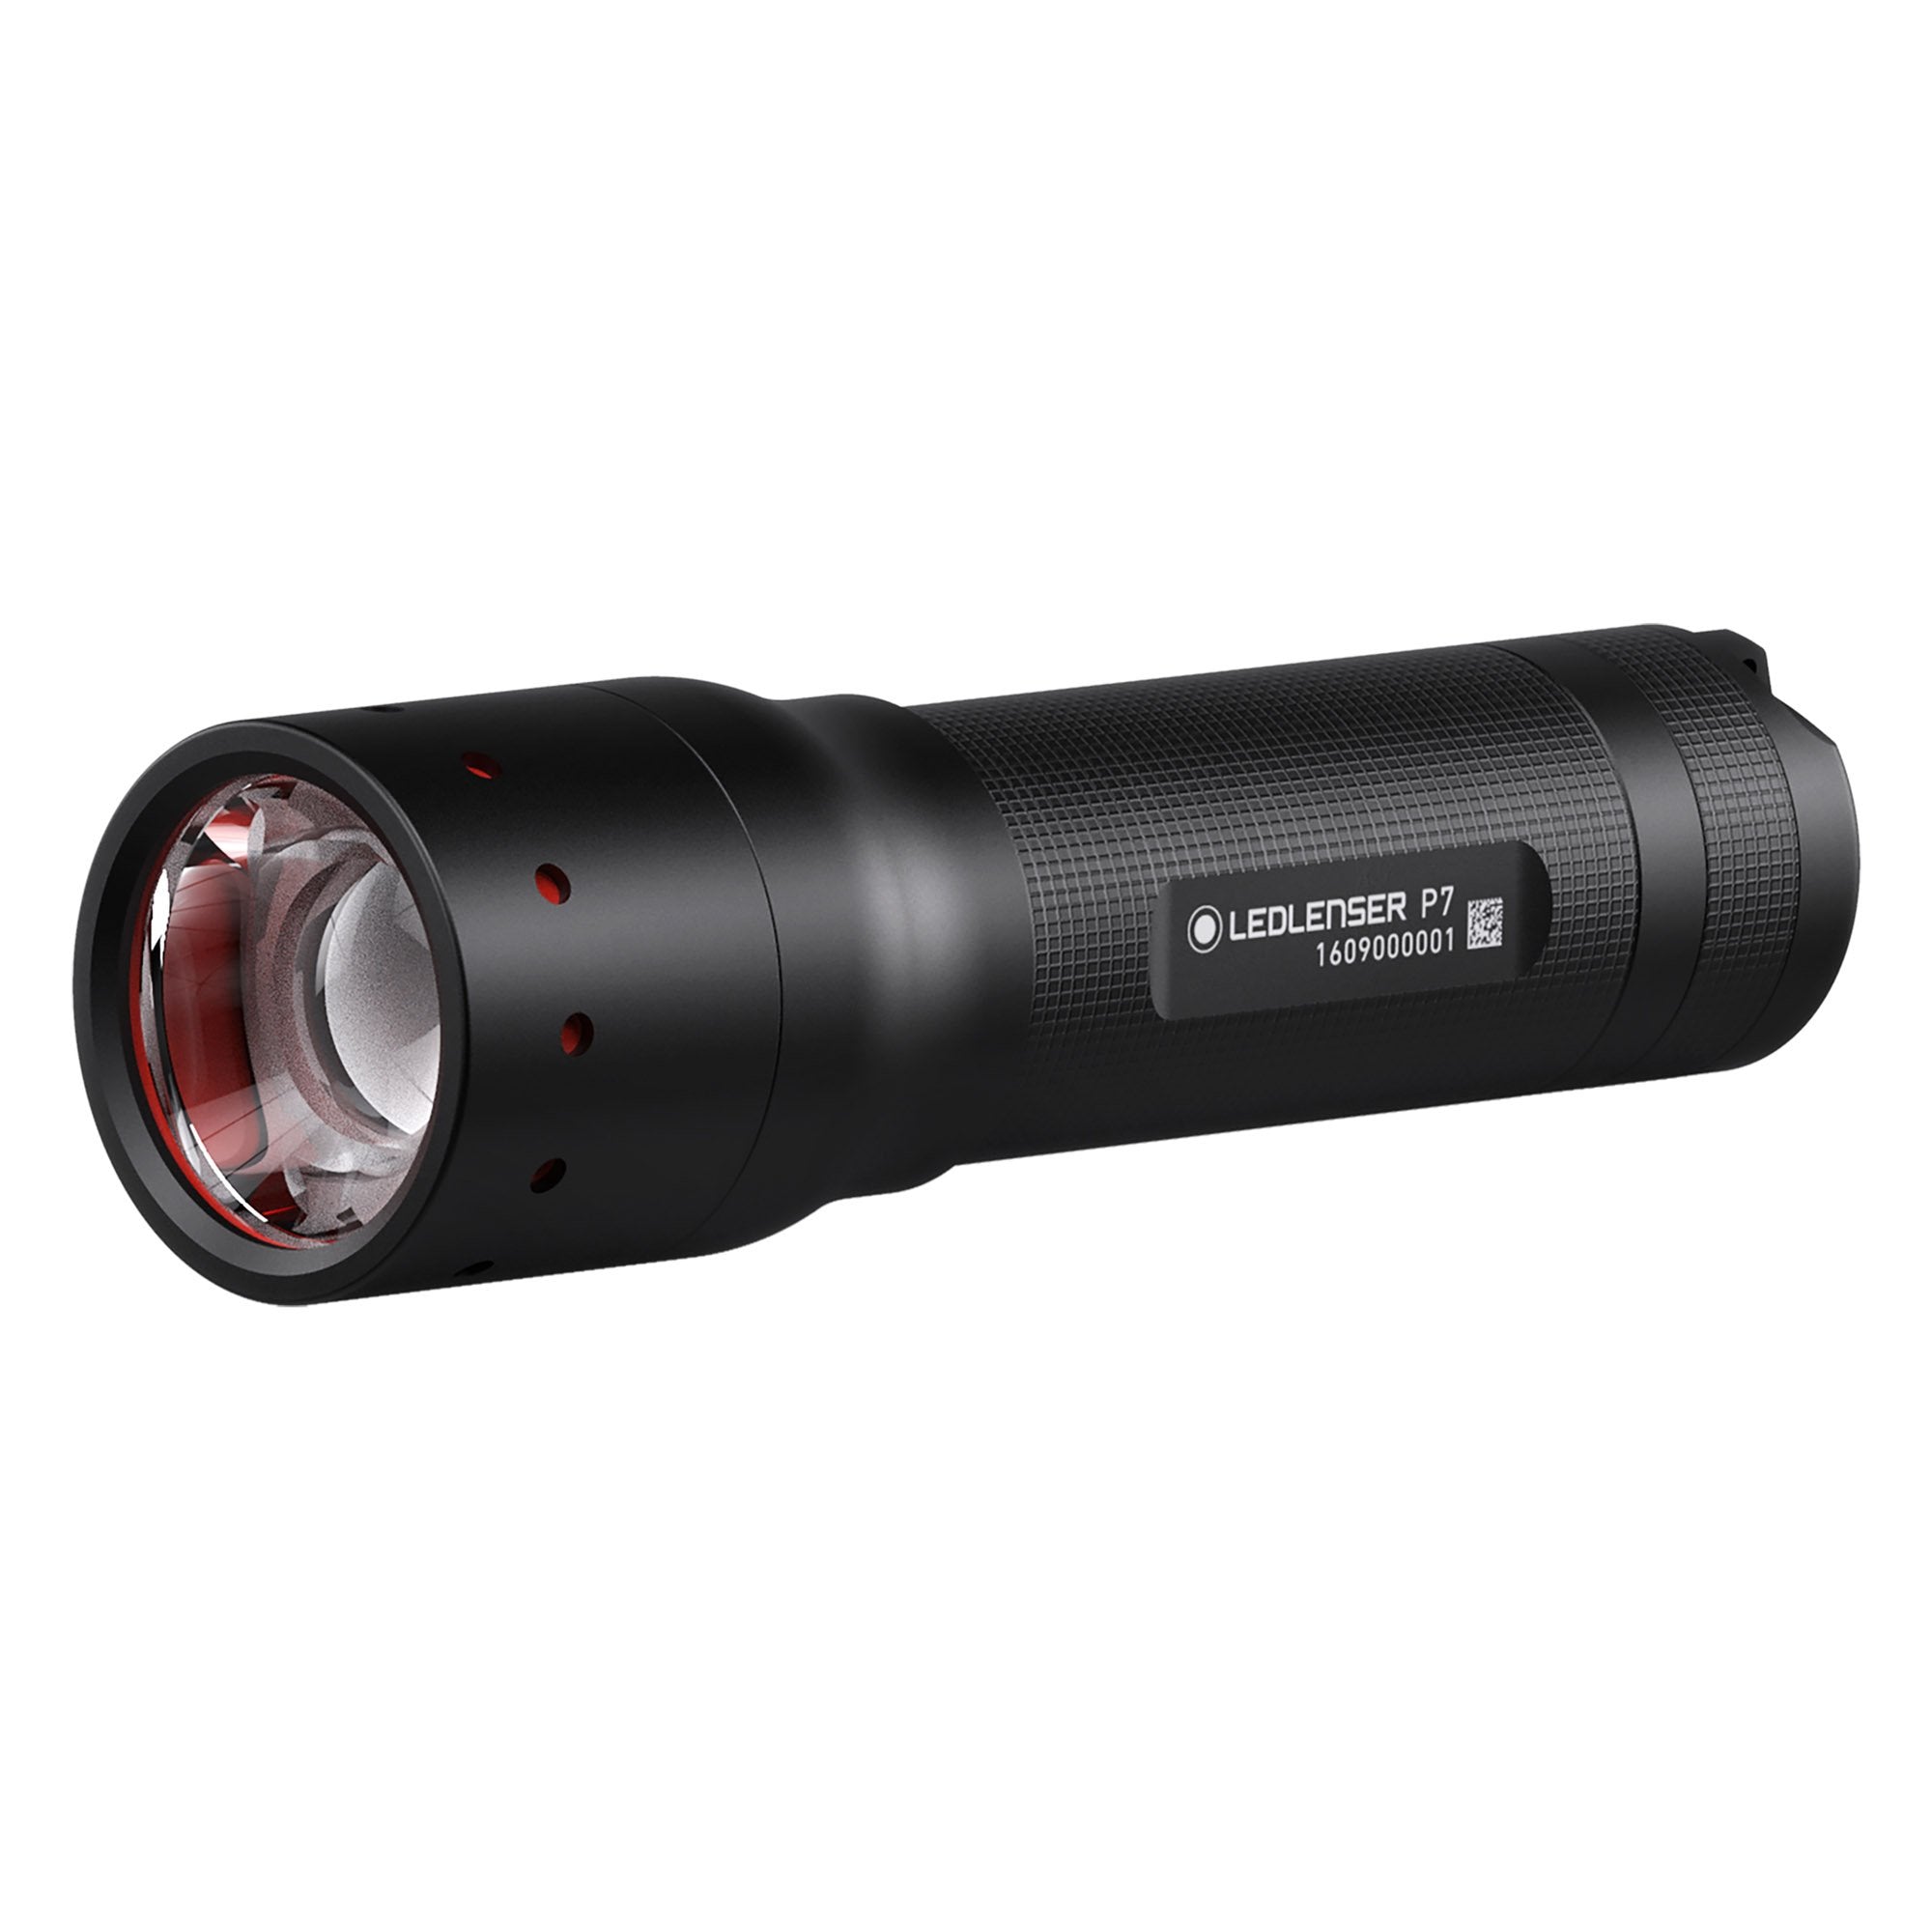 P7 Battery Operated Torch